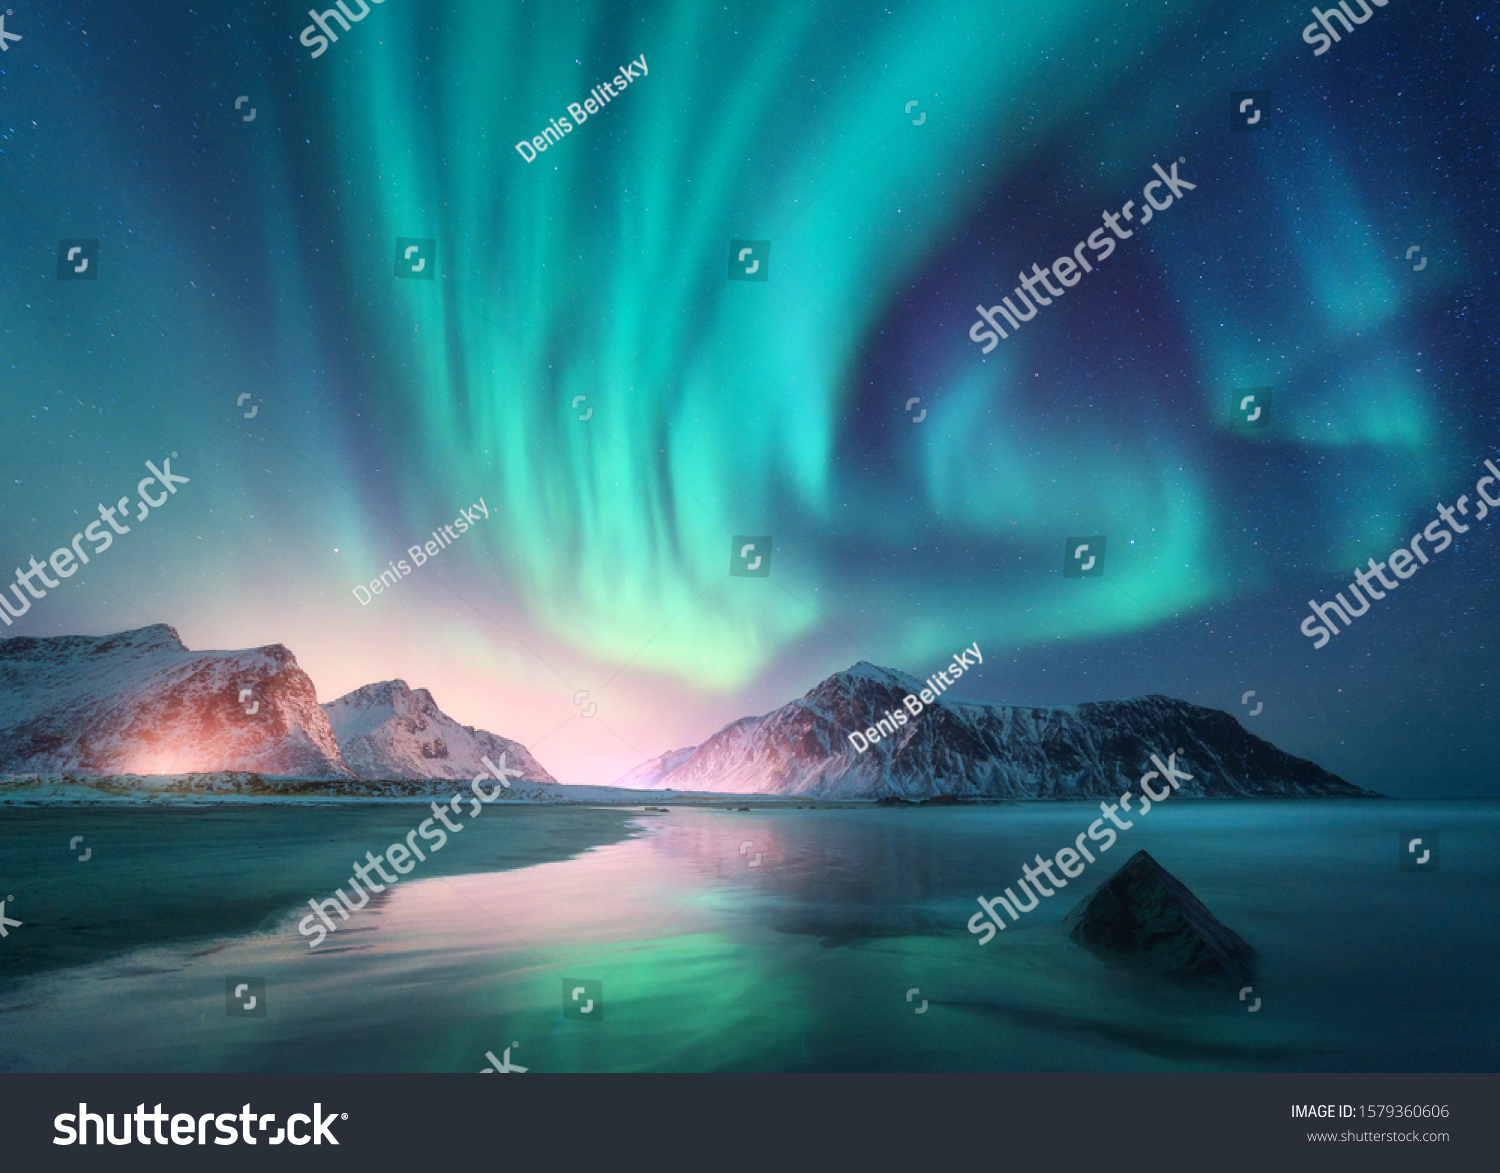 Aurora borealis over the sea, snowy mountains and city lights at night. Northern lights in Lofoten islands, Norway. Starry sky with polar lights. Winter landscape with aurora, reflection, sandy beach  #1579360606